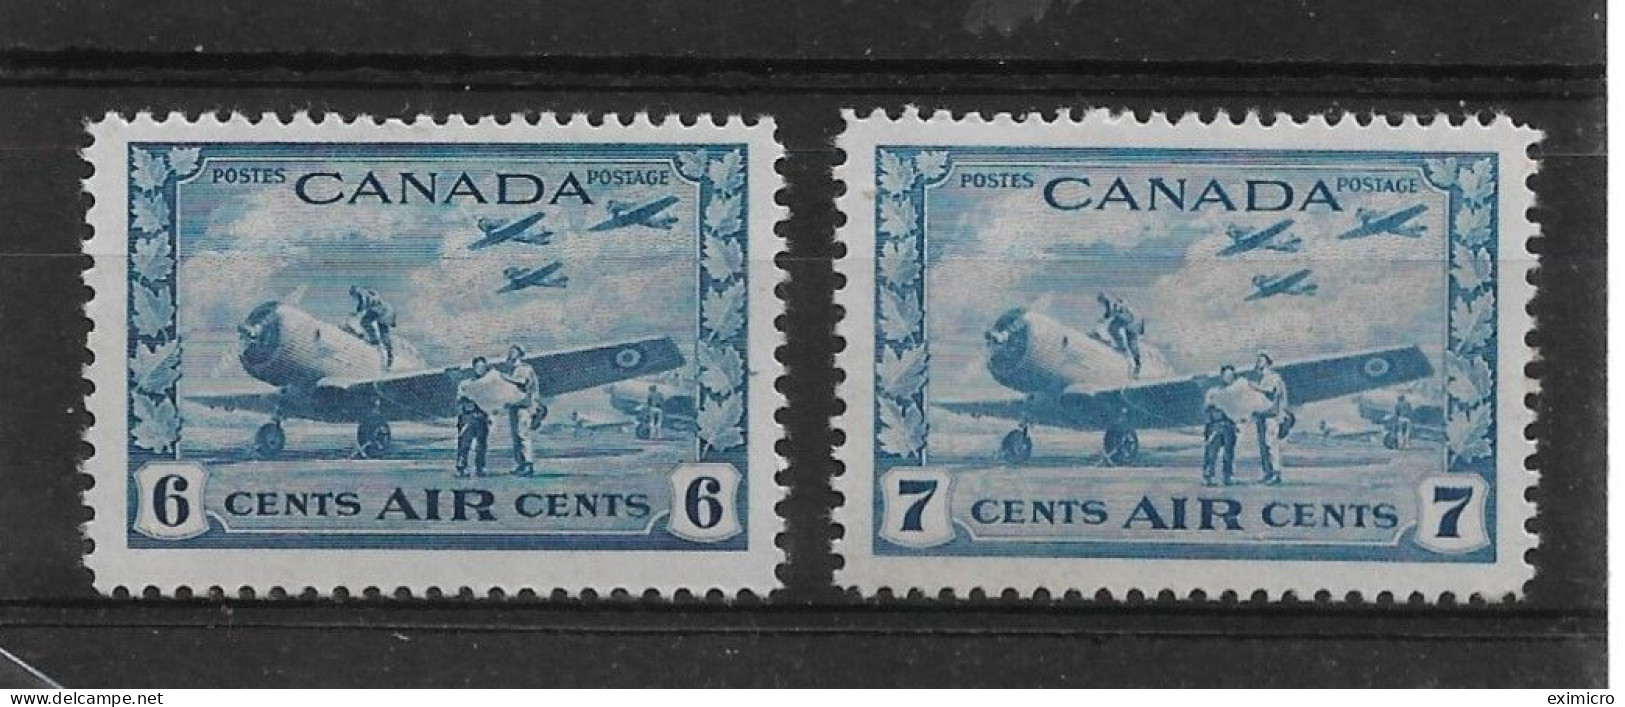 CANADA 1942 - 1943 AIR STAMPS 6c, 7c SG 399/400 UNMOUNTED MINT Cat £37+ - Airmail